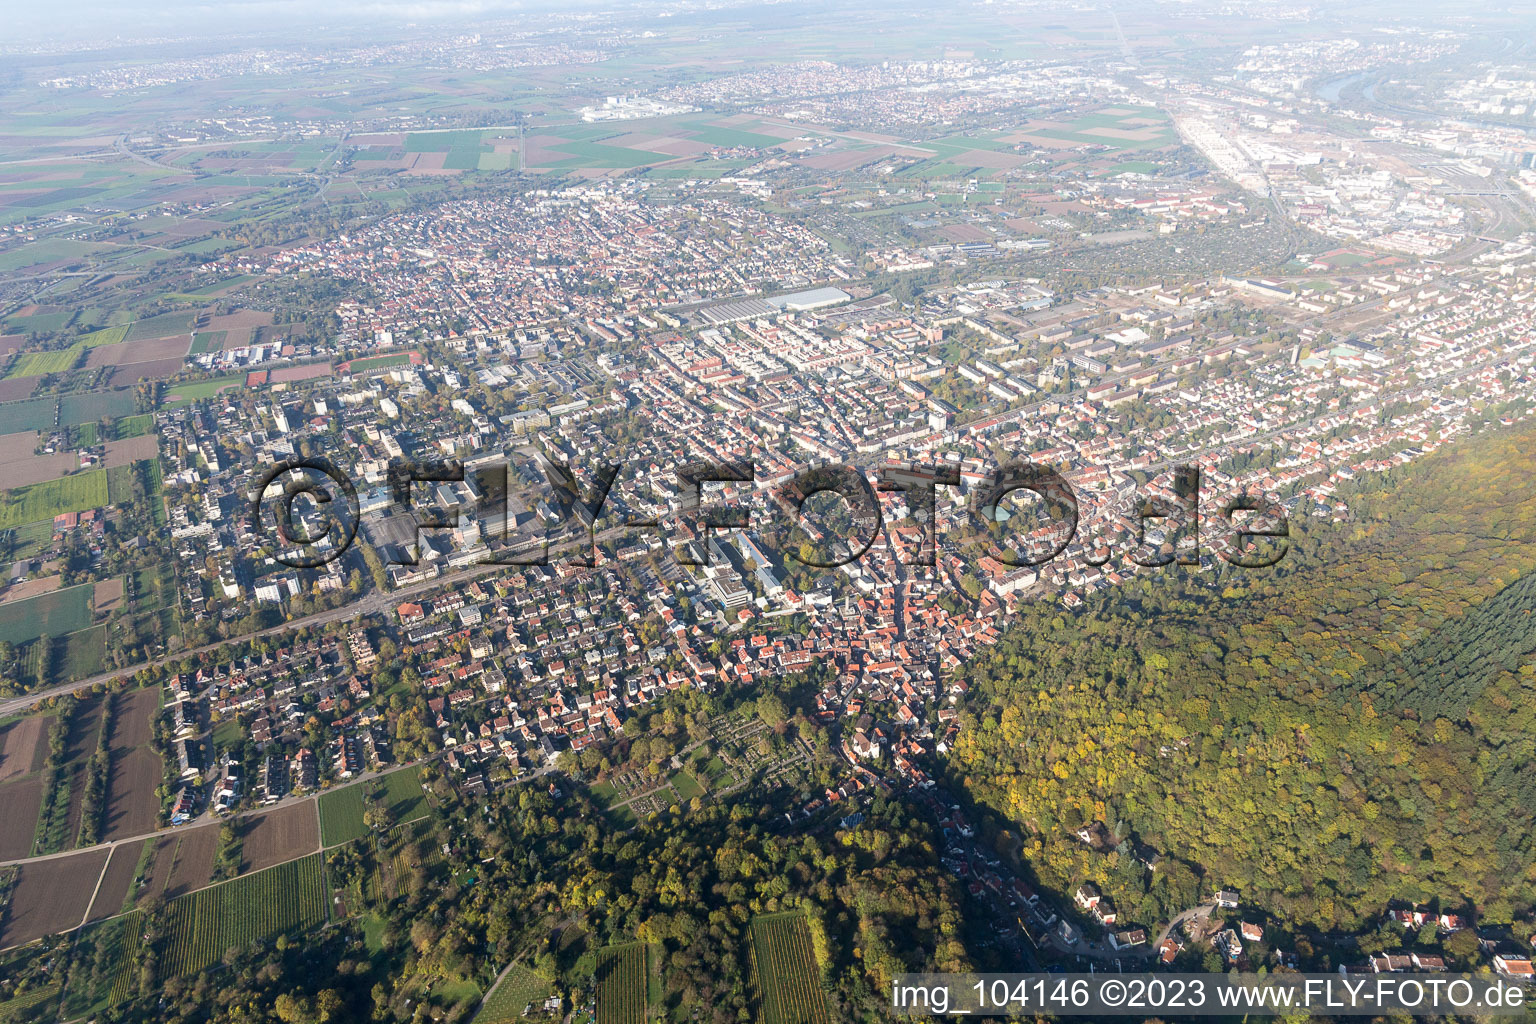 District Rohrbach in Heidelberg in the state Baden-Wuerttemberg, Germany seen from above